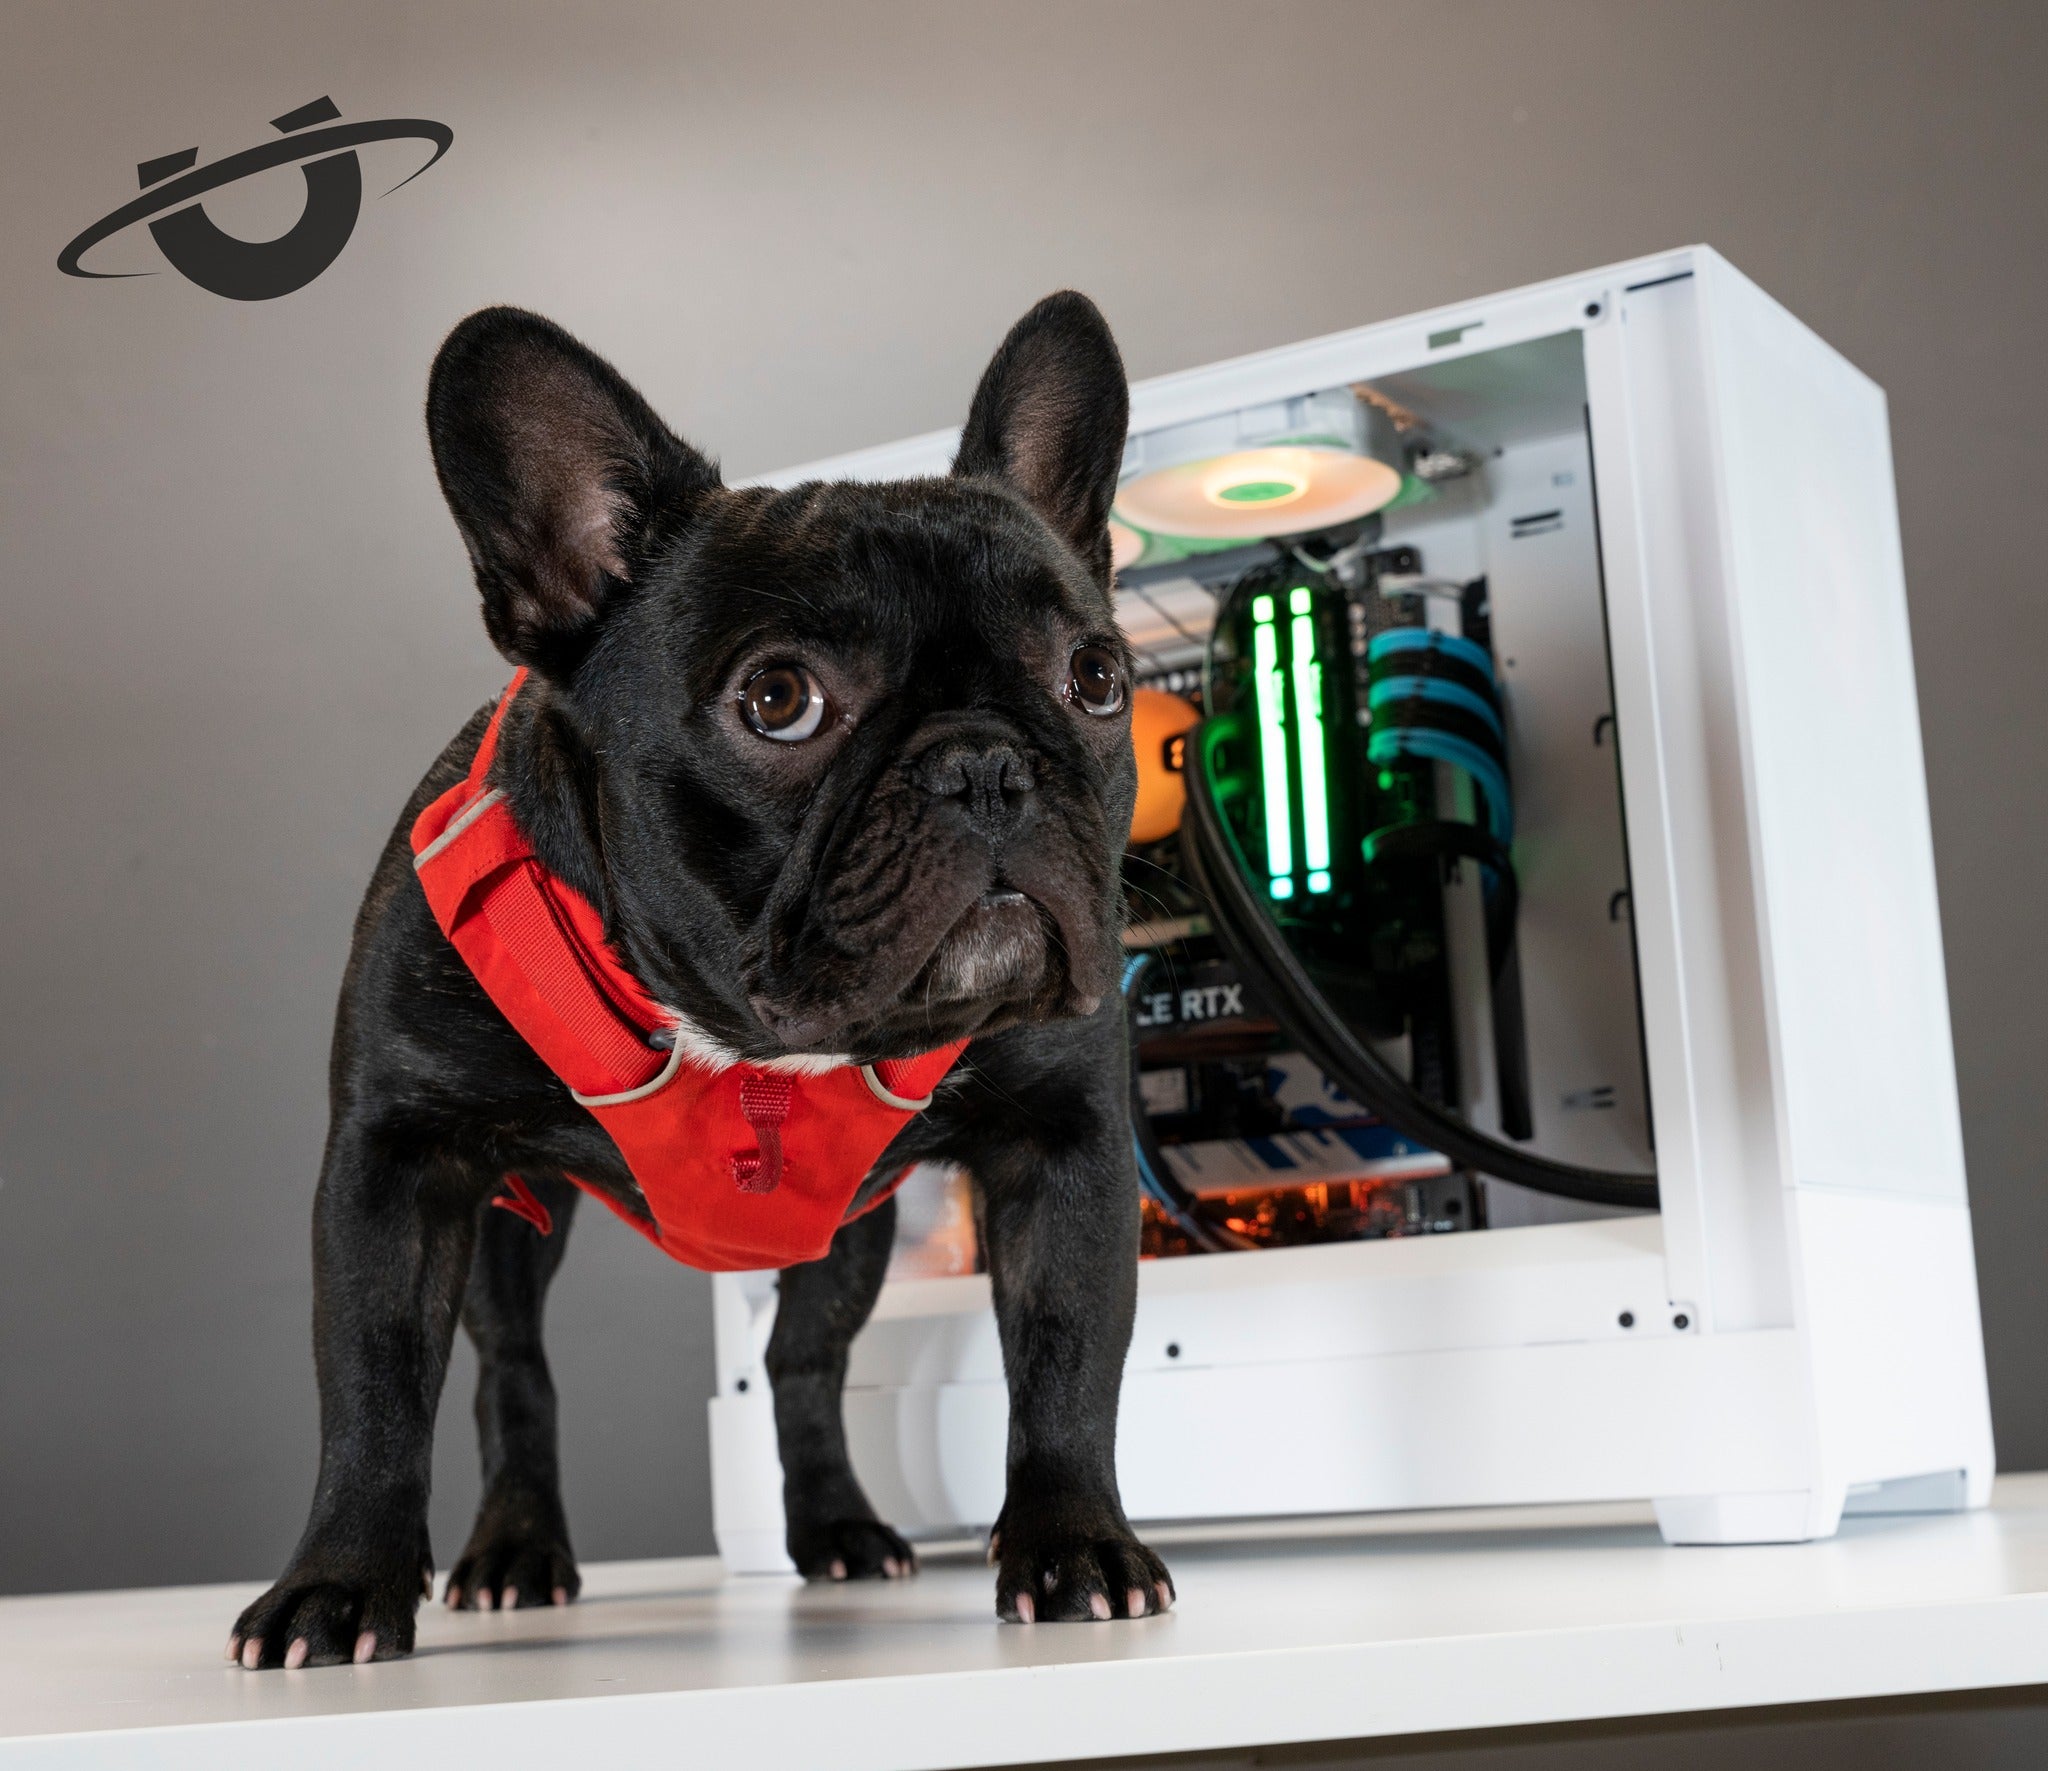 Otis the dog standing in front of his fav PC - The Utopia Pandora, small and powerful just like him